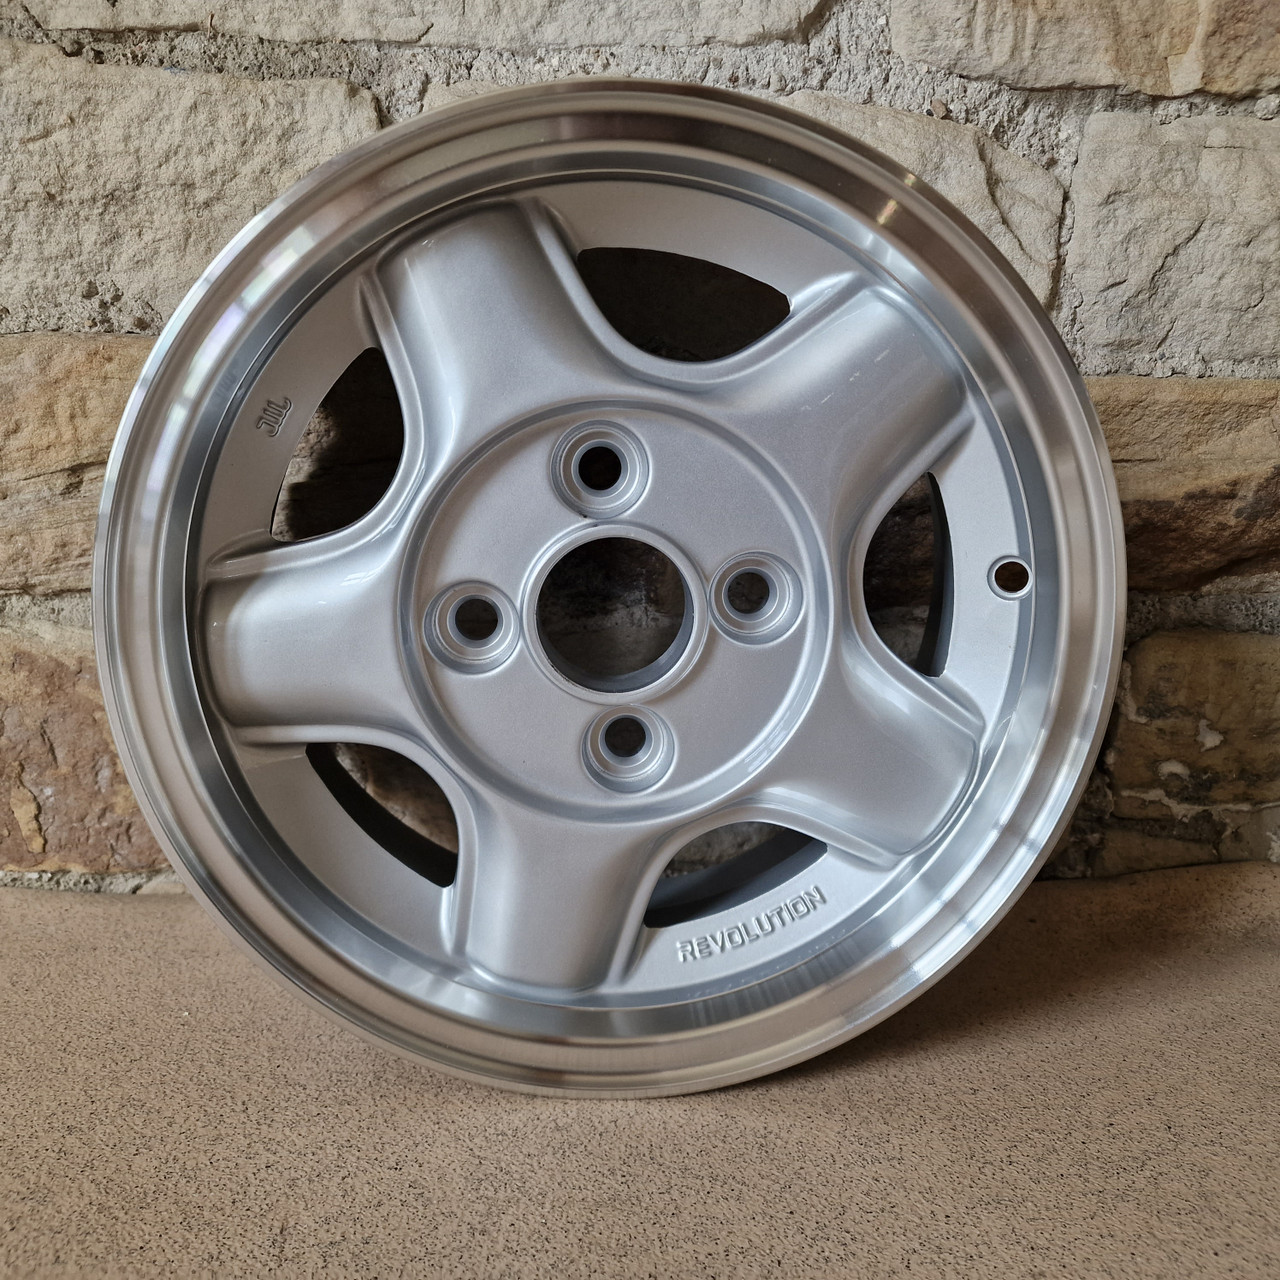 5x12 Silver Revolution RFX Alloy Wheel for Classic Mini - 1 only - (12:6)